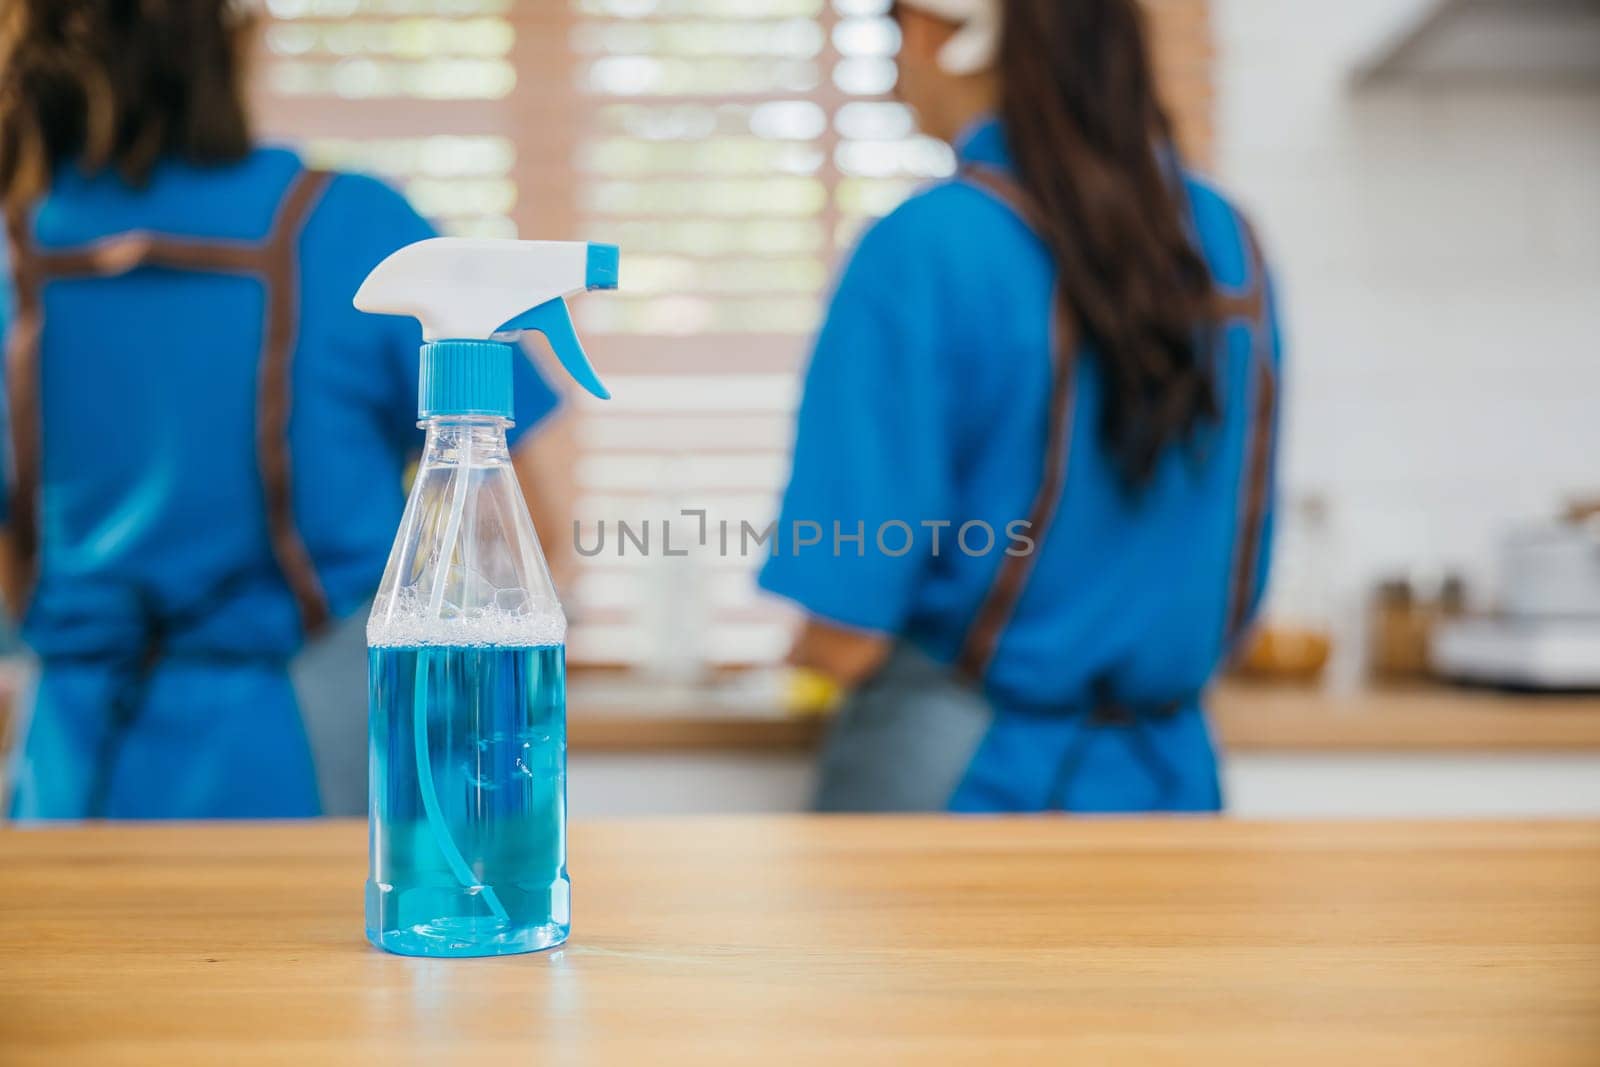 Occupied woman cleaning kitchen desk using spray product and towel. Housekeeping concept with a focus on hygiene and safety. Uniformed cleaner at work. Clean disinfect home care. Closeup spray bottle.